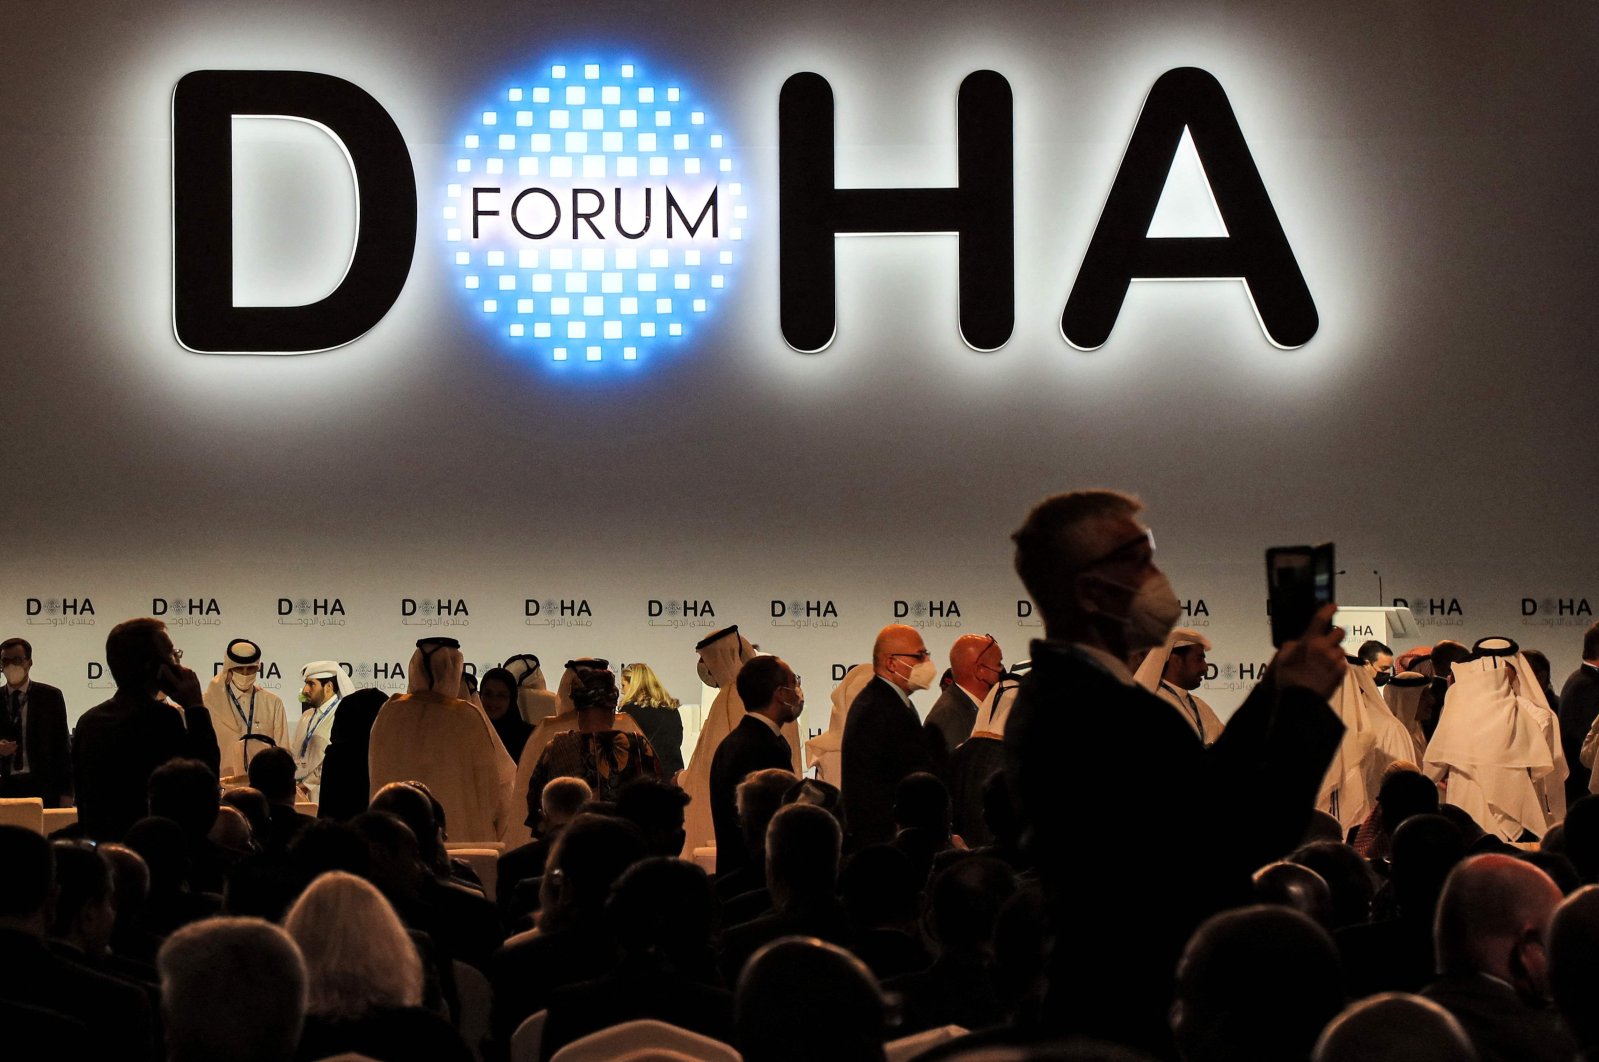 Delegates attend the Doha Forum in Doha, Qatar, March 26, 2022. (AFP Photo)